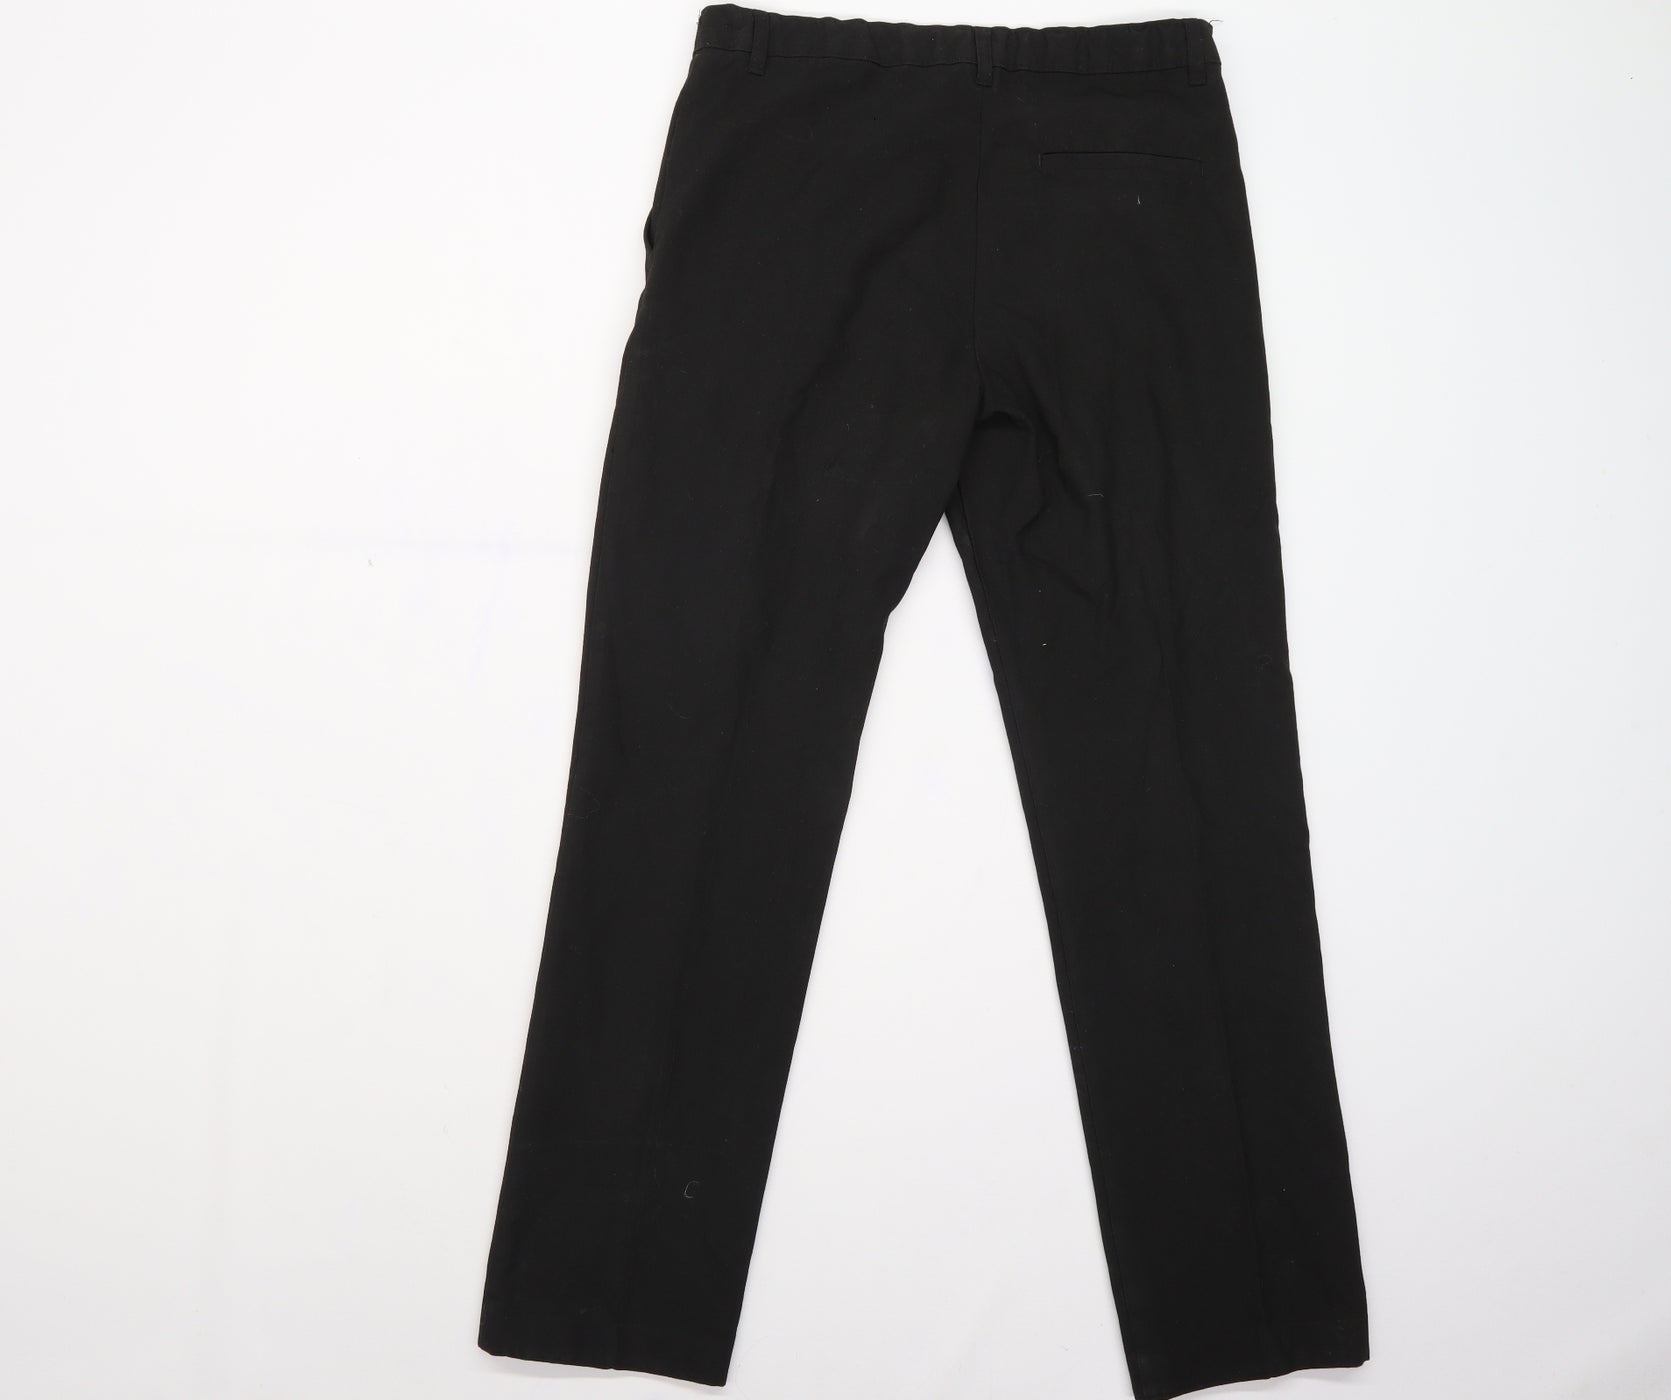 Marks and Spencer Boys Black Dress Pants Trousers Size 12-13 Years ...